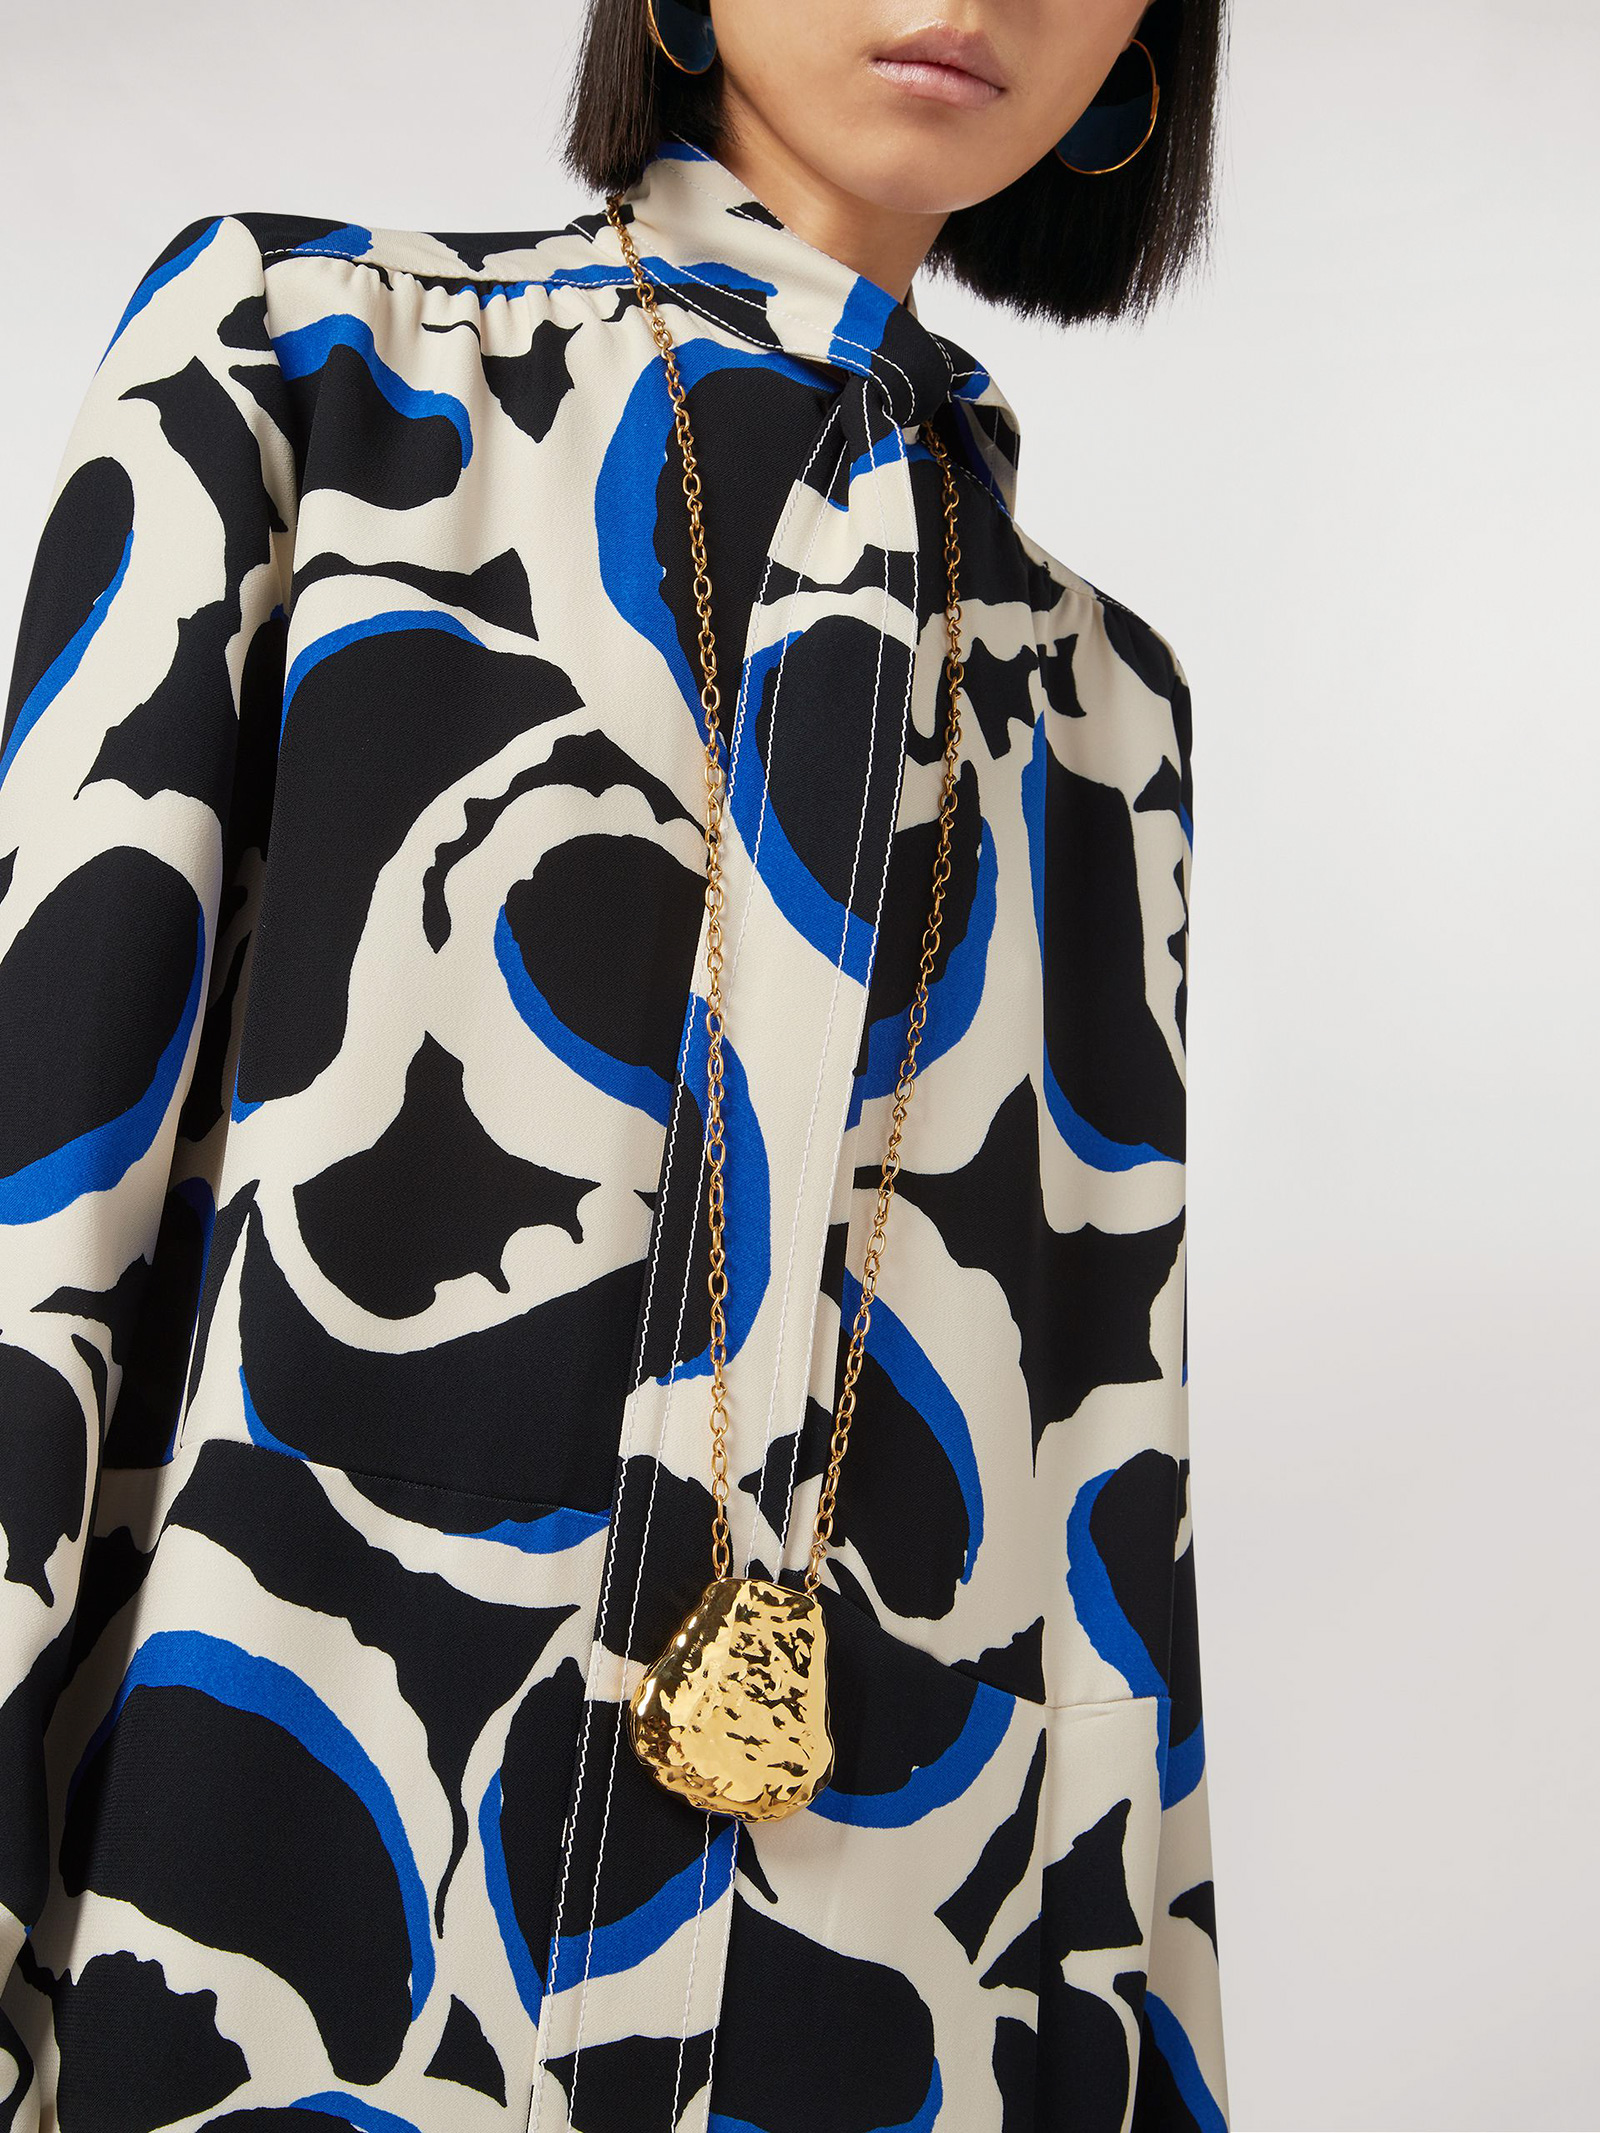 Marni Pre-Fall 2019 For Lookbook Friday – ALLIE NYC